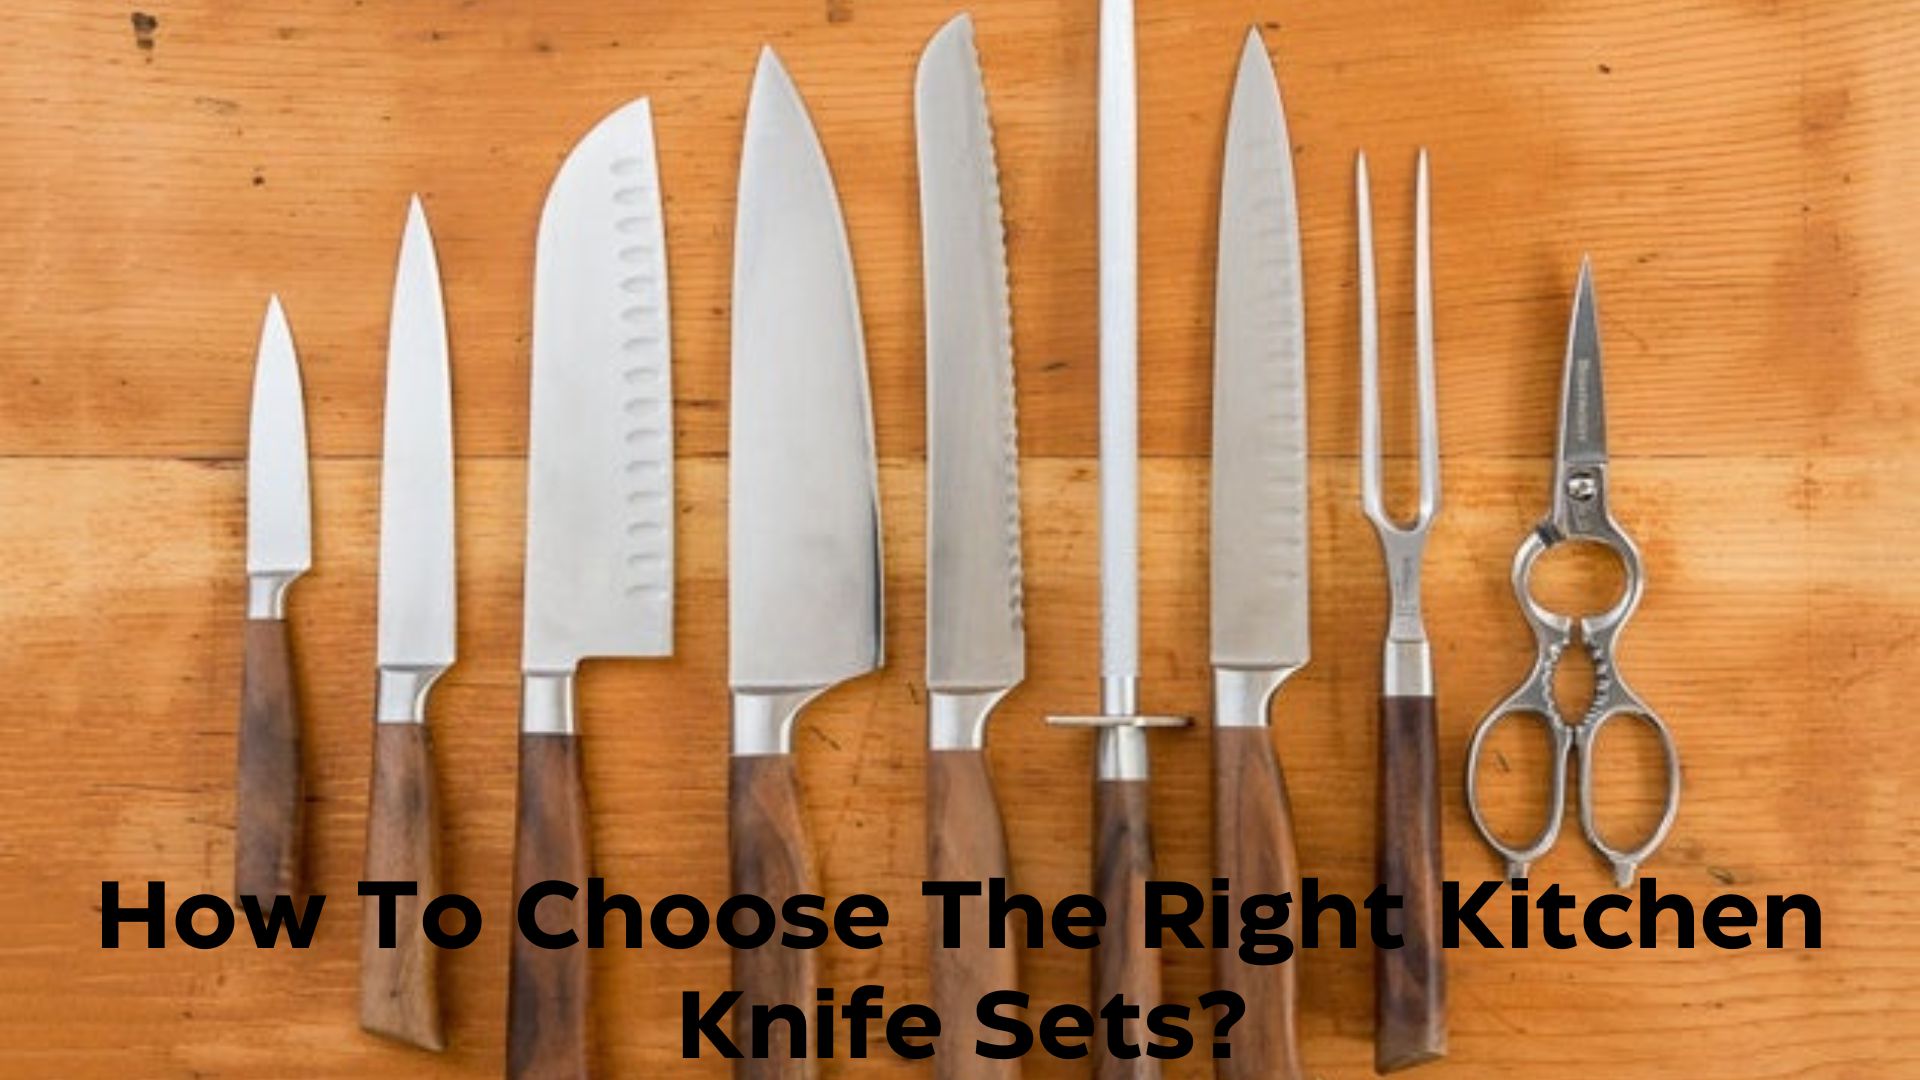 How To Choose The Right Kitchen Knife Sets?